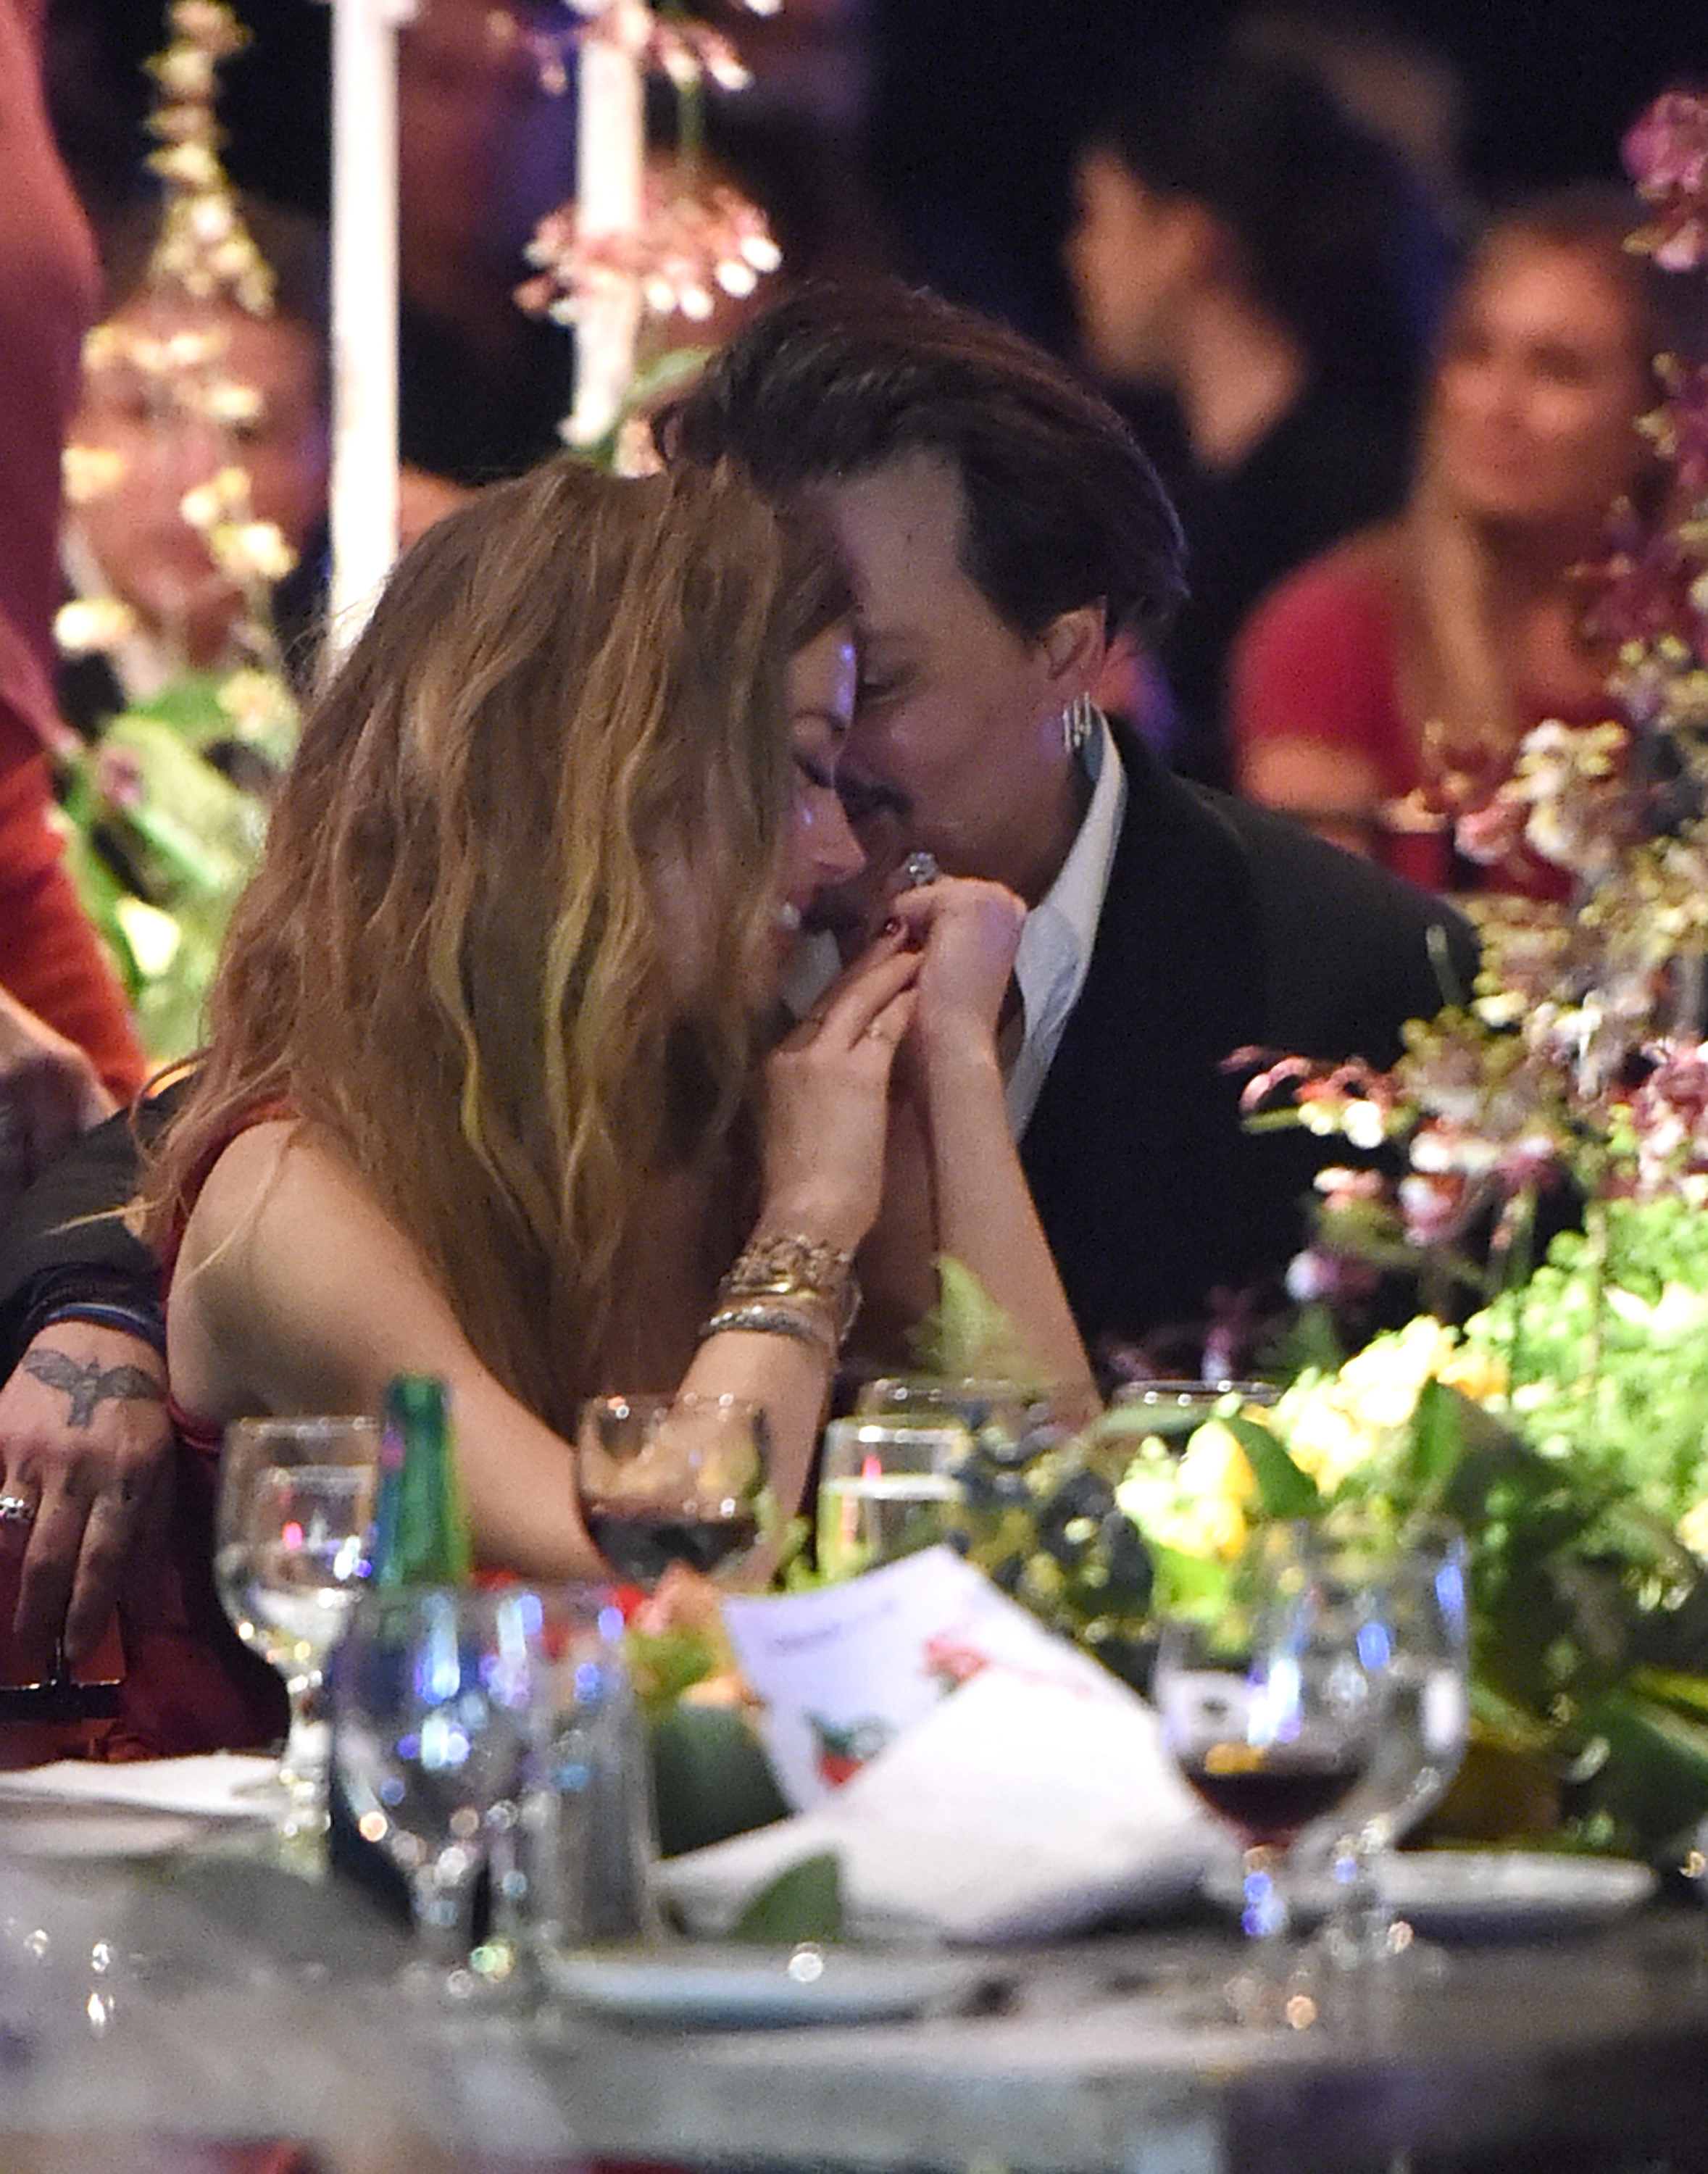 Actors Amber Heard and Johnny Depp attend The Art of Elysium 2016 HEAVEN Gala presented by Vivienne Westwood and Andreas Kronthaler at 3LABS on January 9, 2016 in Culver City, California. (Photo by Jason Merritt/Getty Images for Art of Elysium)